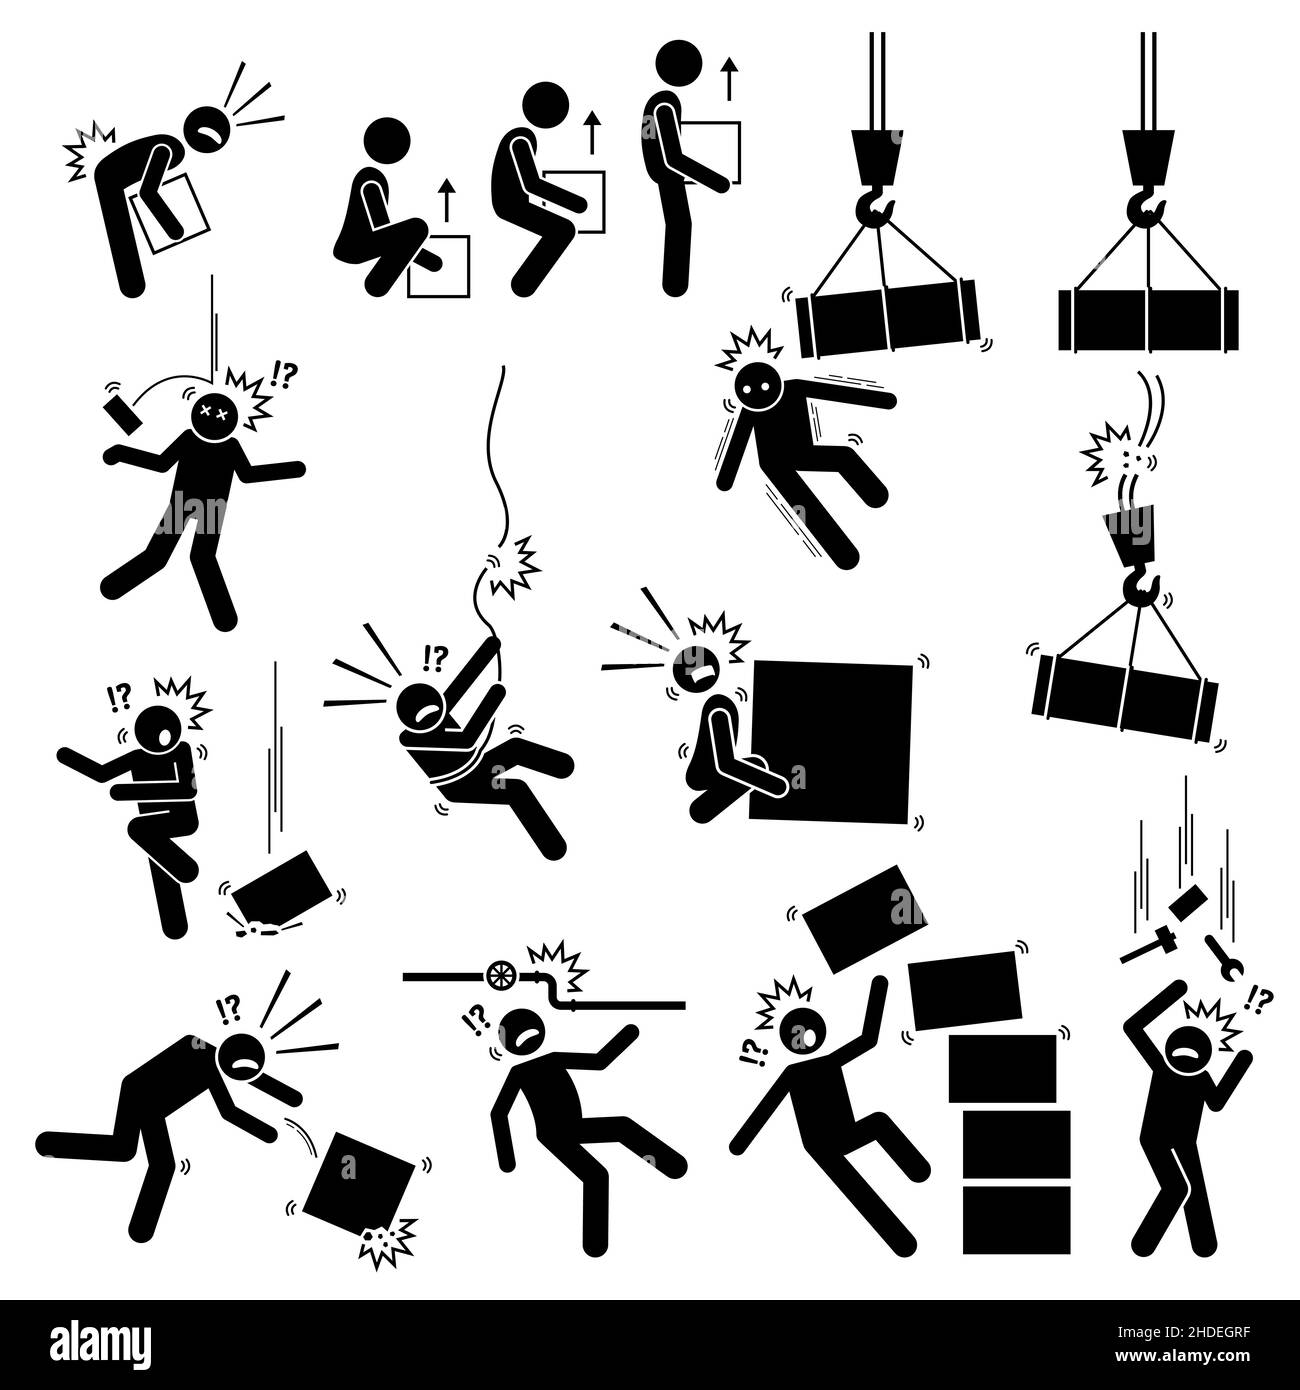 Warning sign, danger risk symbol, and safety precaution at workplace. Vector illustrations pictogram of manual handling, dangerous object things falli Stock Vector